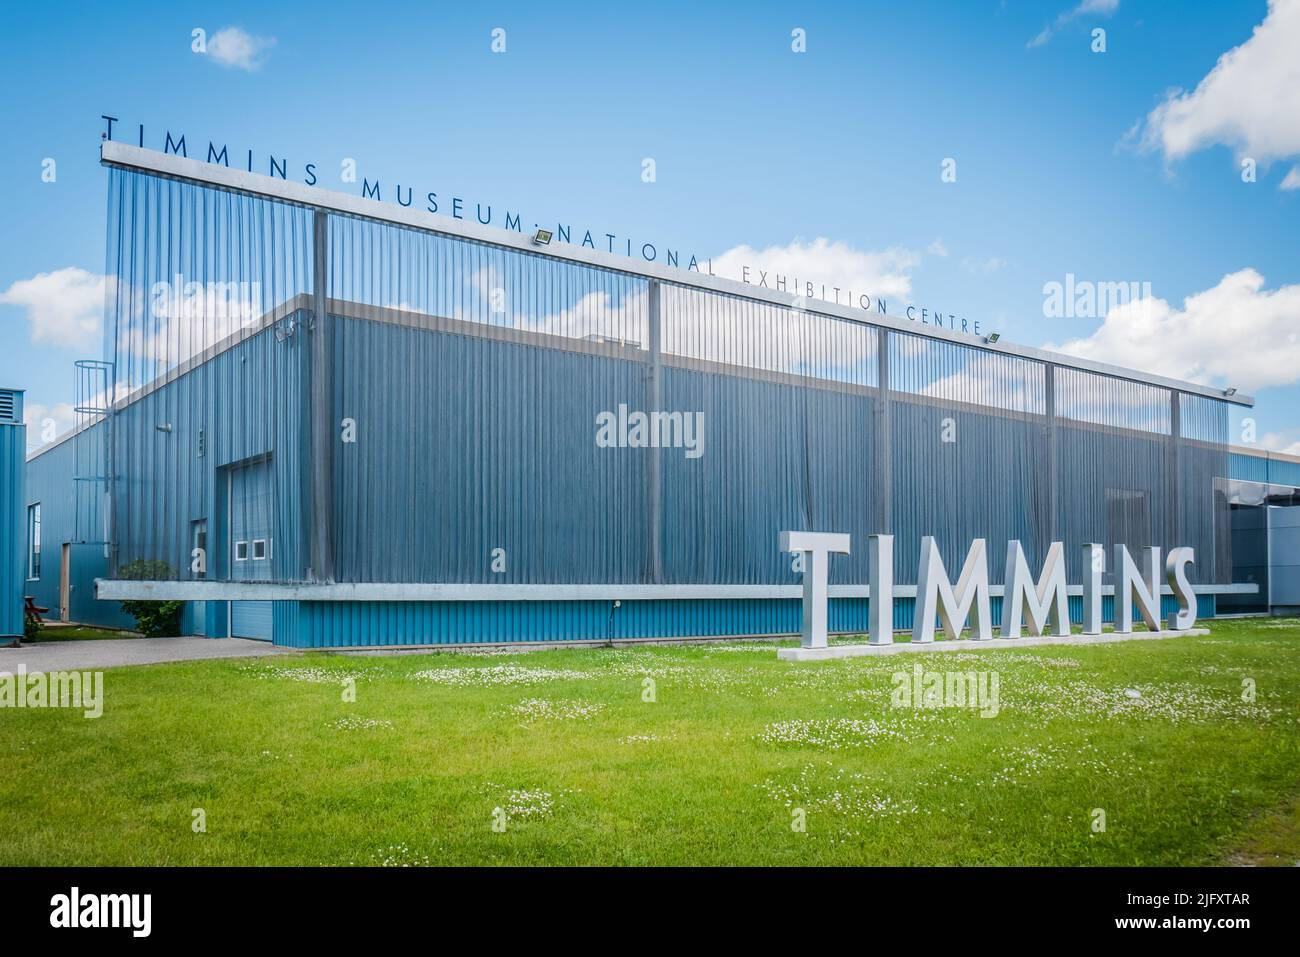 Timmins Museum National Exhibition Centre, Timmins, Ontario, Canada Stock Photo